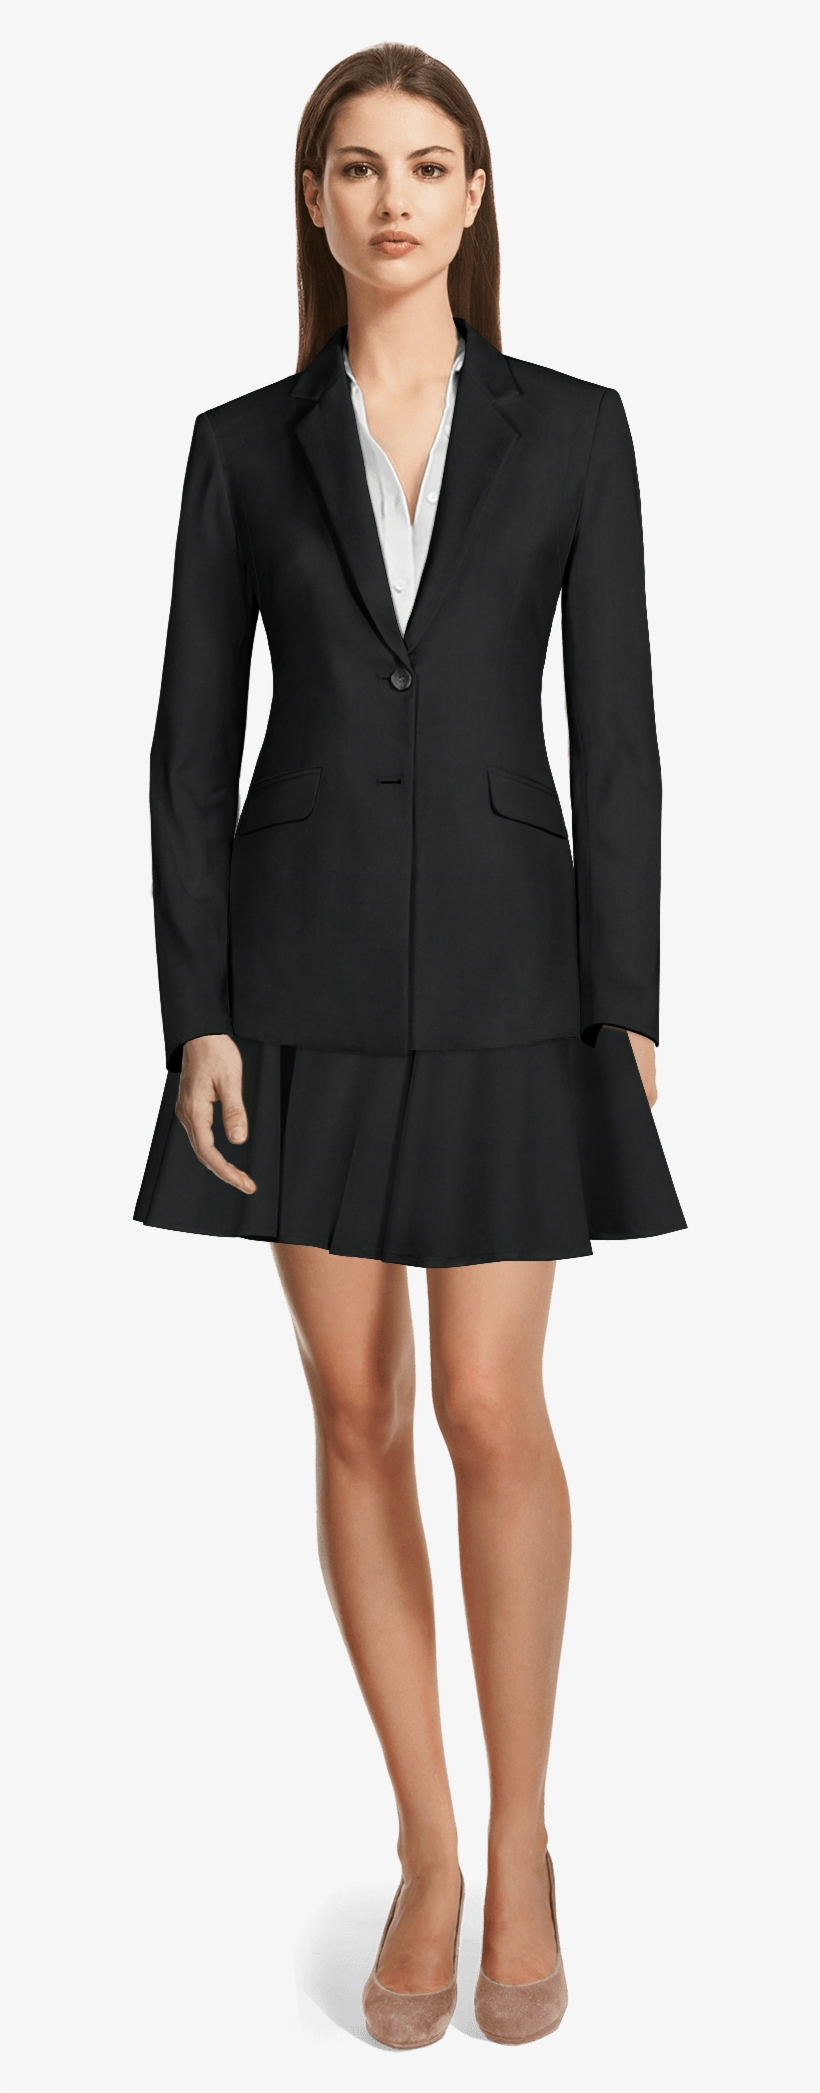 Black 100% Wool Skirt Suit - Sumissura Women's Black Polyester Tuxedo, Tailored, transparent png #1578834